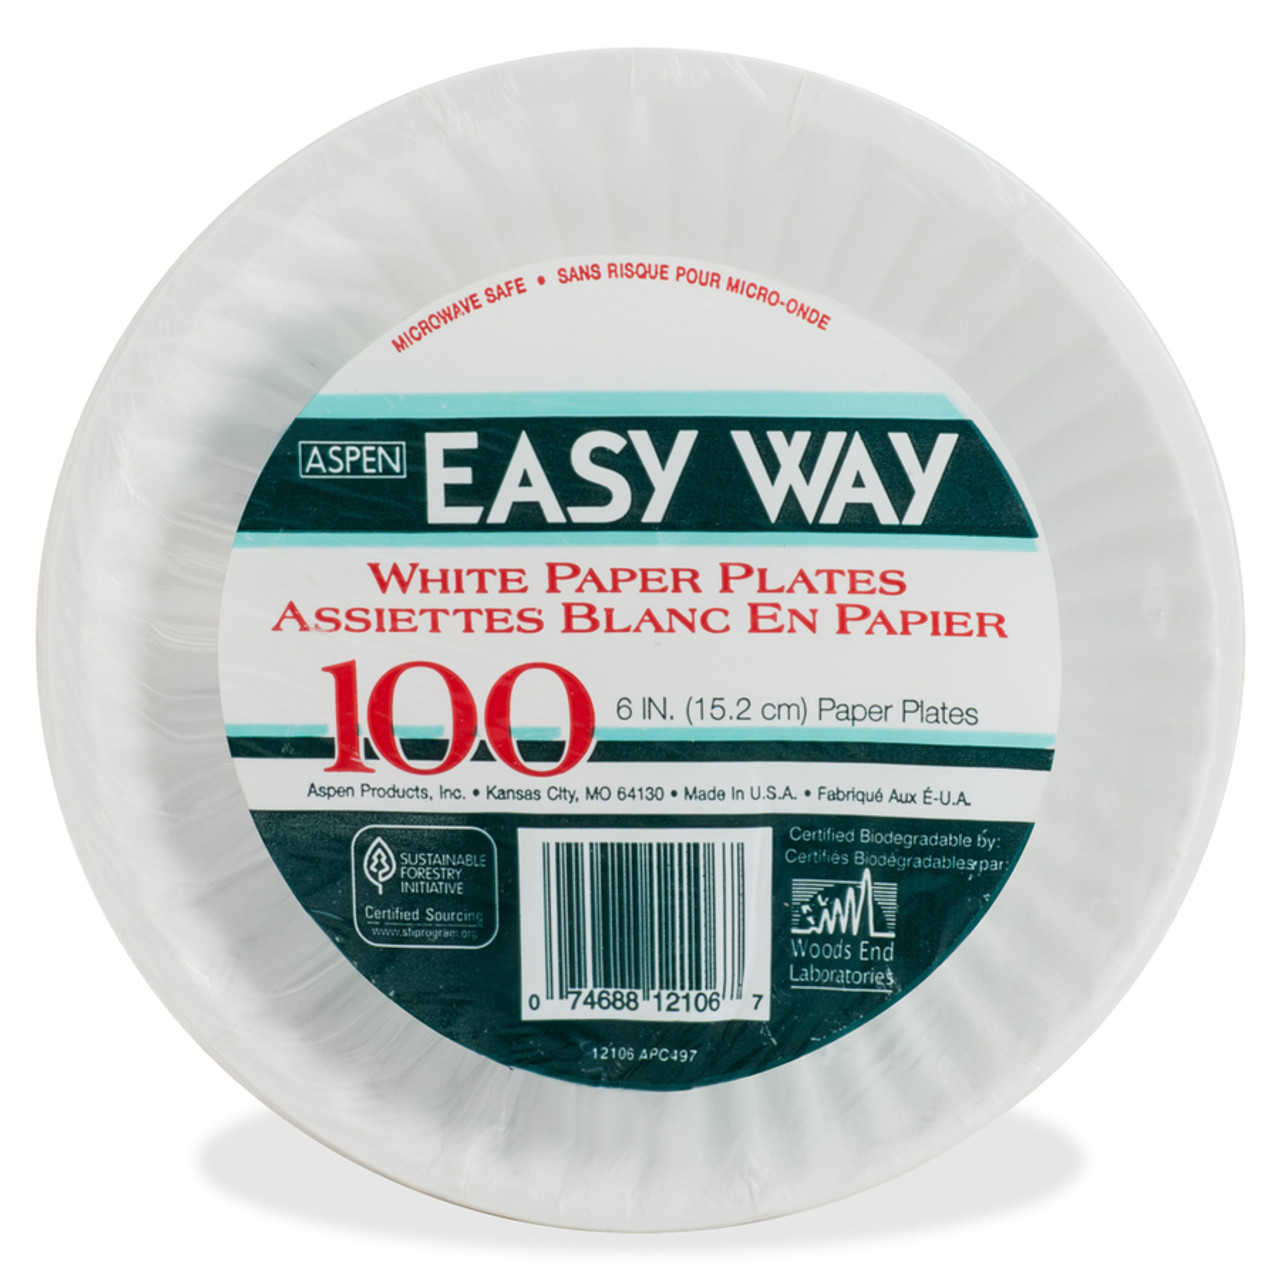 AJM Packaging Uncoated Paper Plates, 6 Inches, White, Round, 1000/Carton